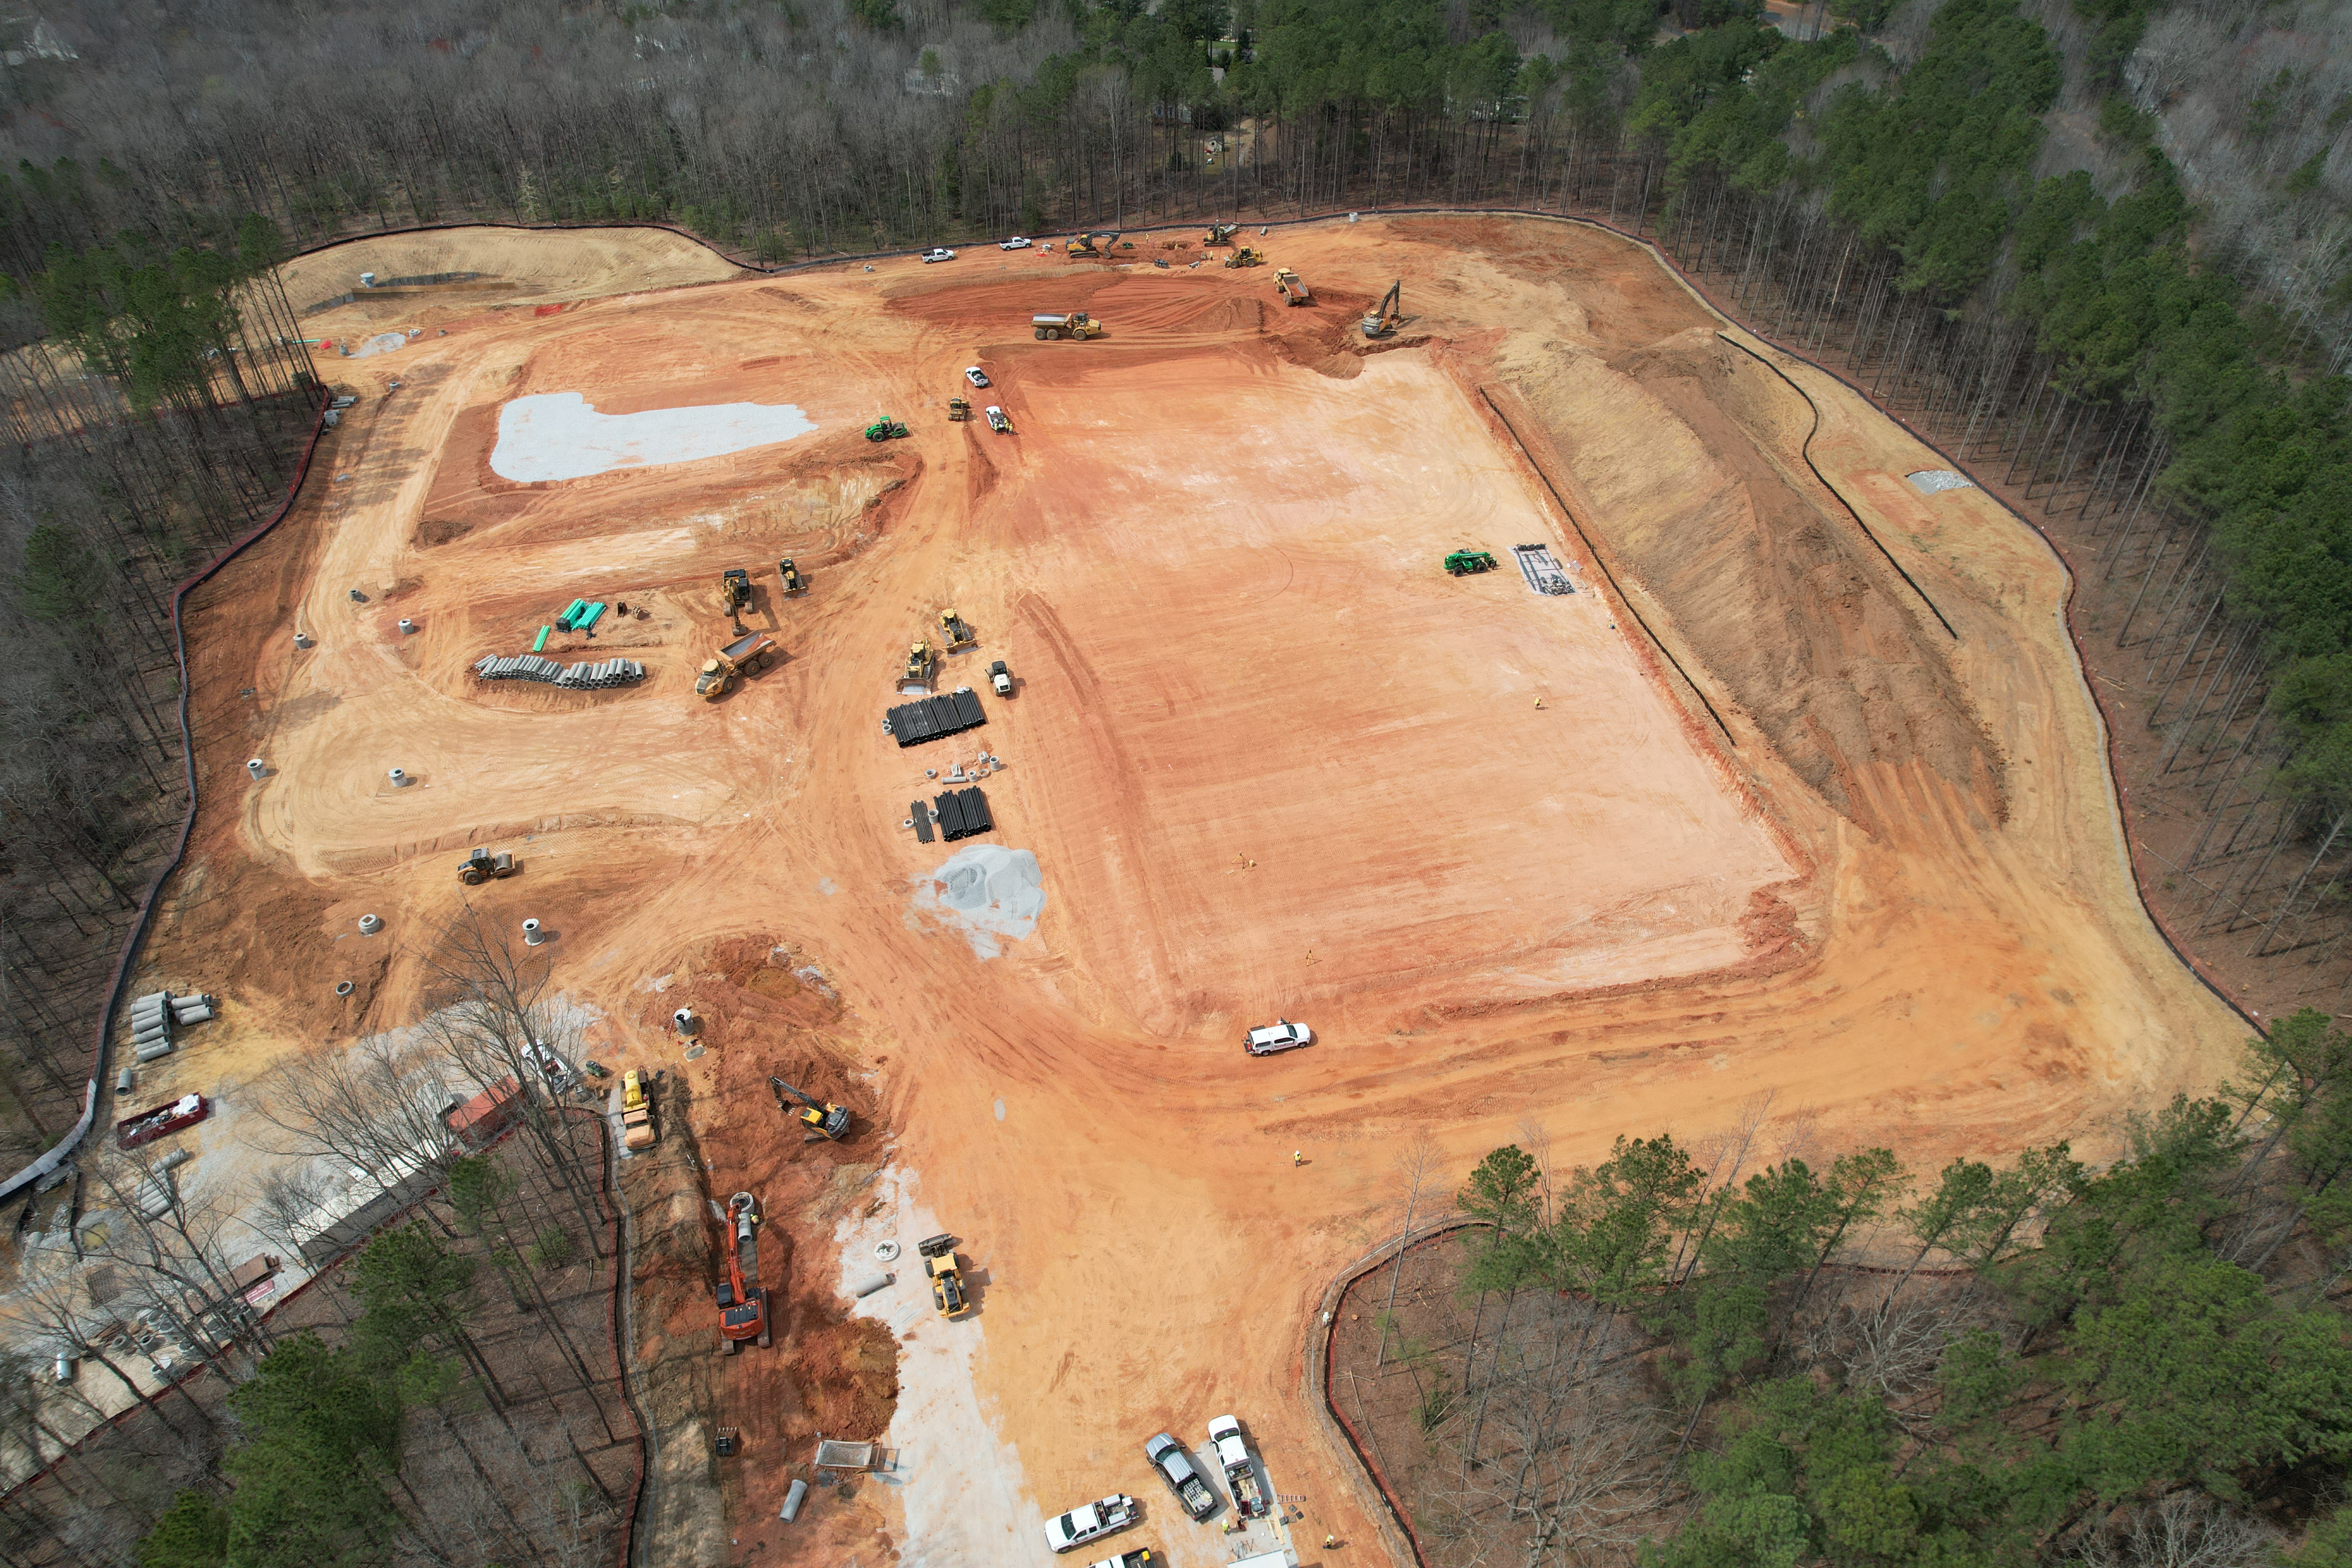 Drone image of new GES construction site with graded school pad clearly visible